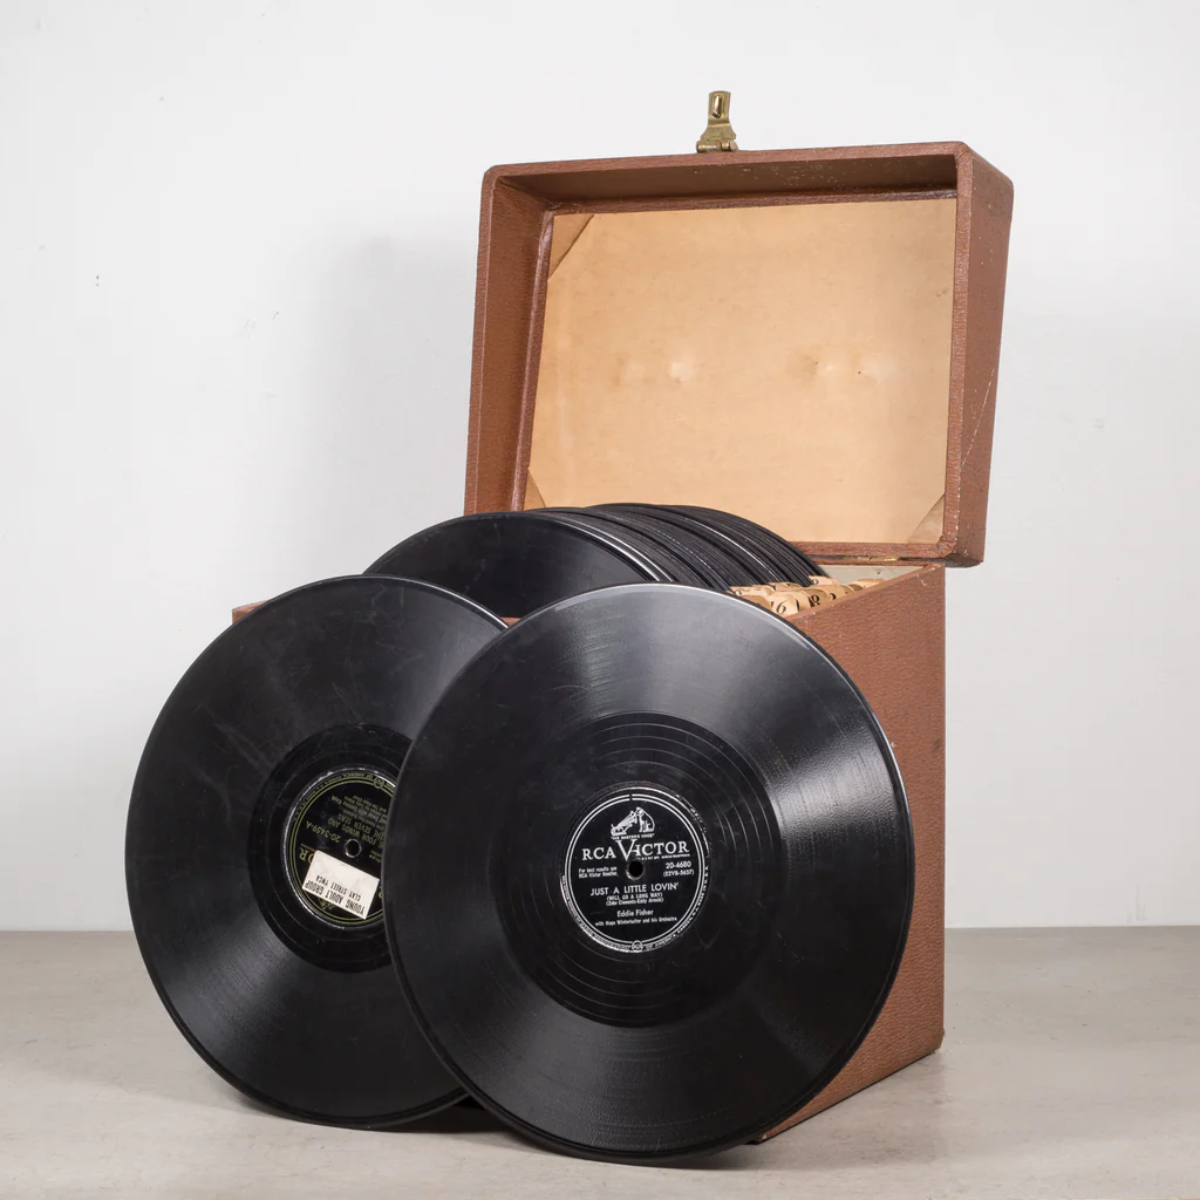 17. Timeless Melodies: Surprise Him with Vintage Vinyl Records of Special Songs